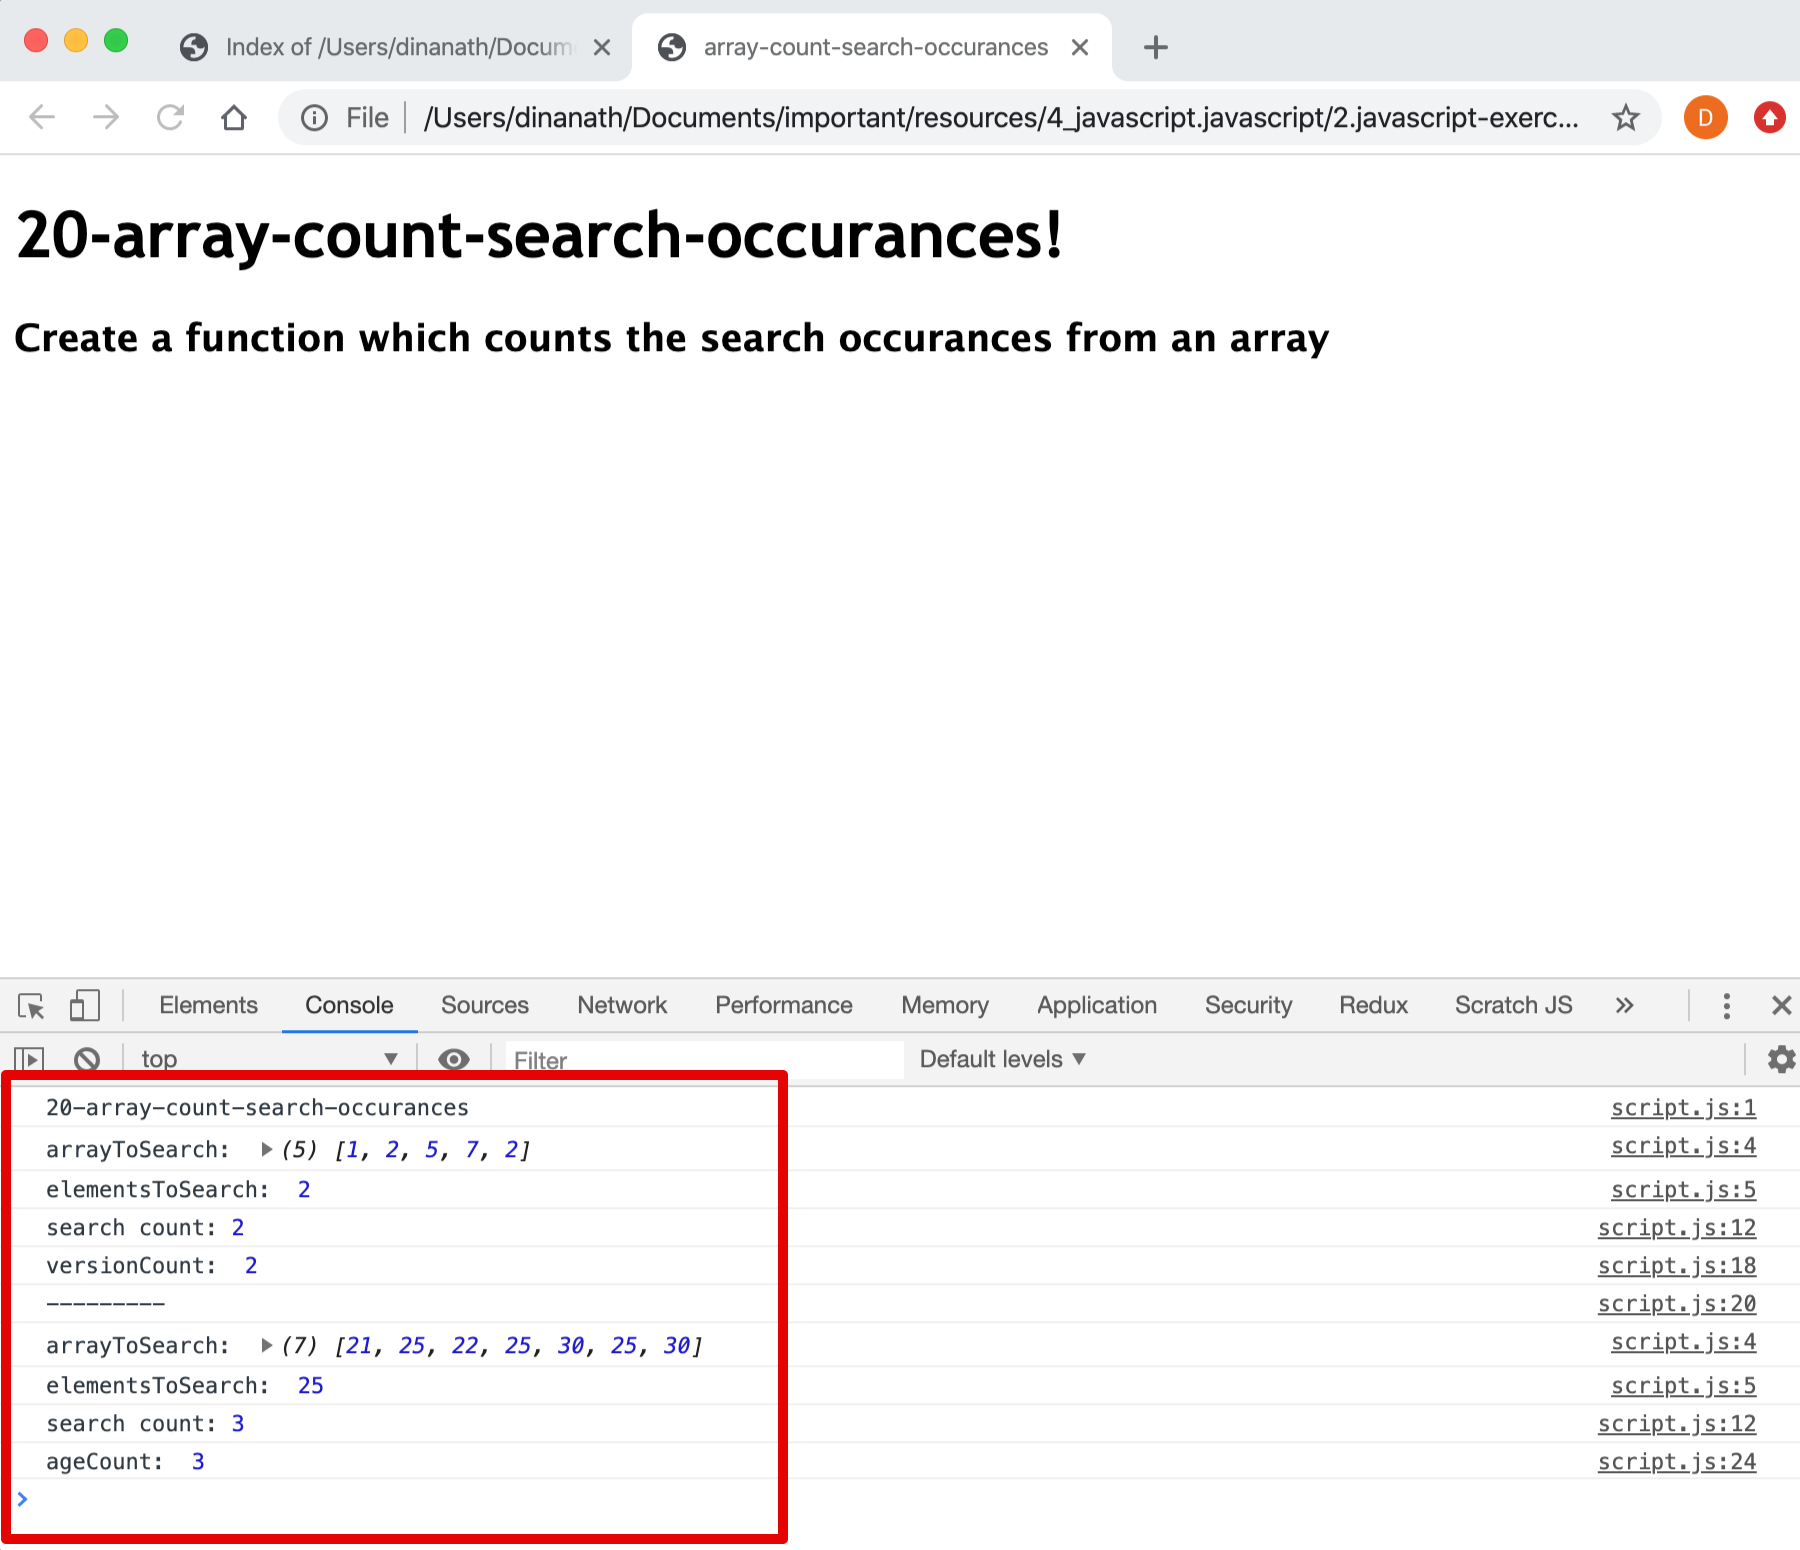 20-01-array-count-search-occurances.png